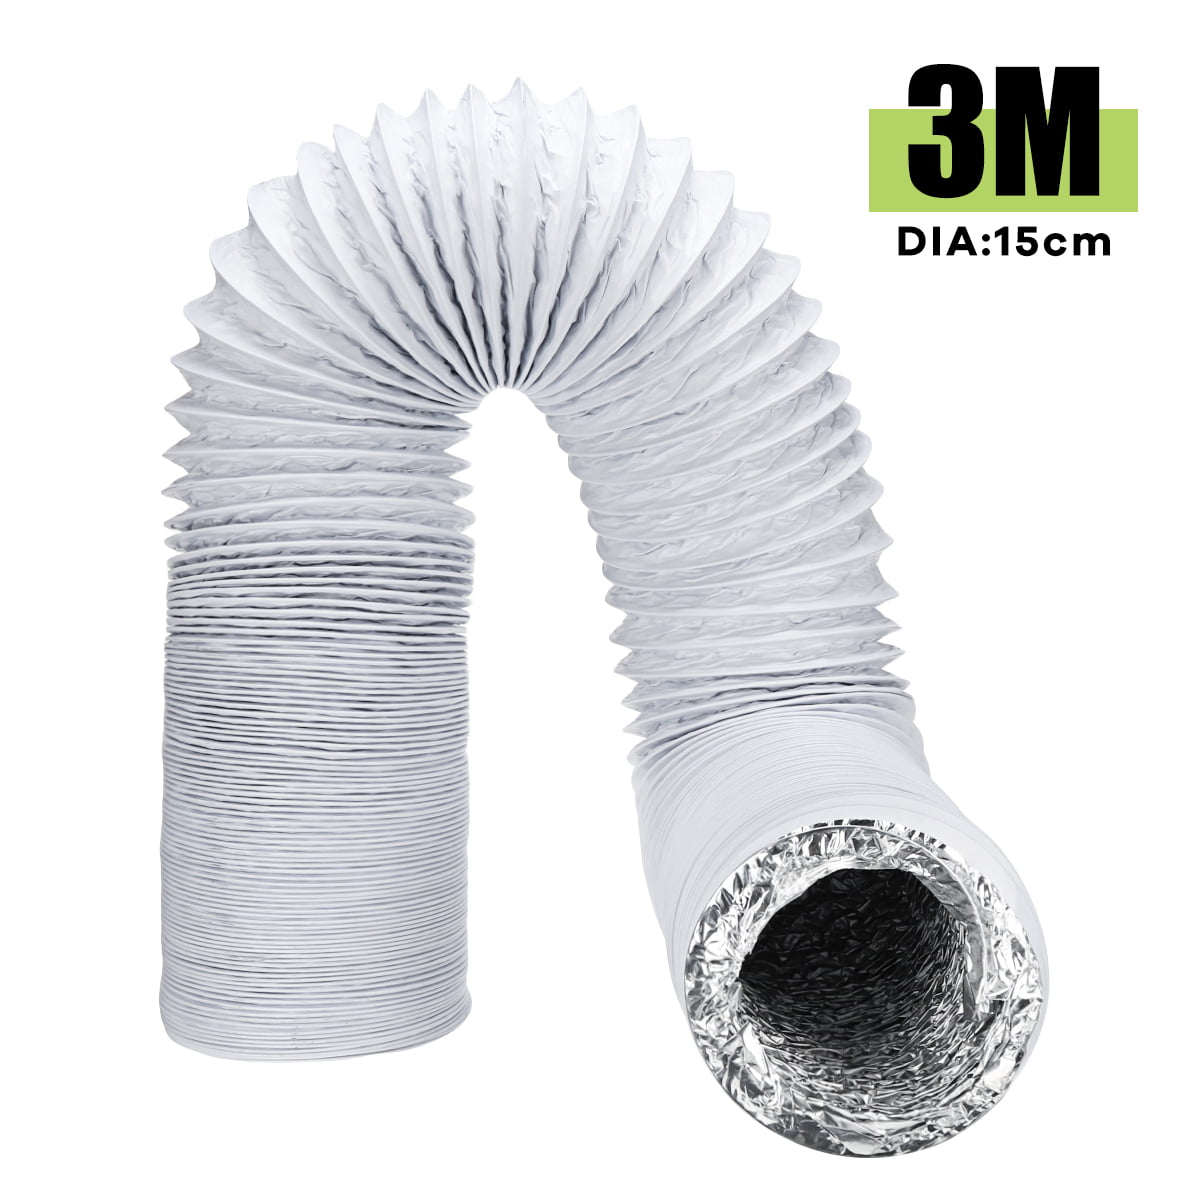 White OSALADI 2m Air Conditioner Hose Portable Replacement AC Tube Exhaust Vent with 15cm Diameter for Heating Cooling Ventilation and Exhaust 